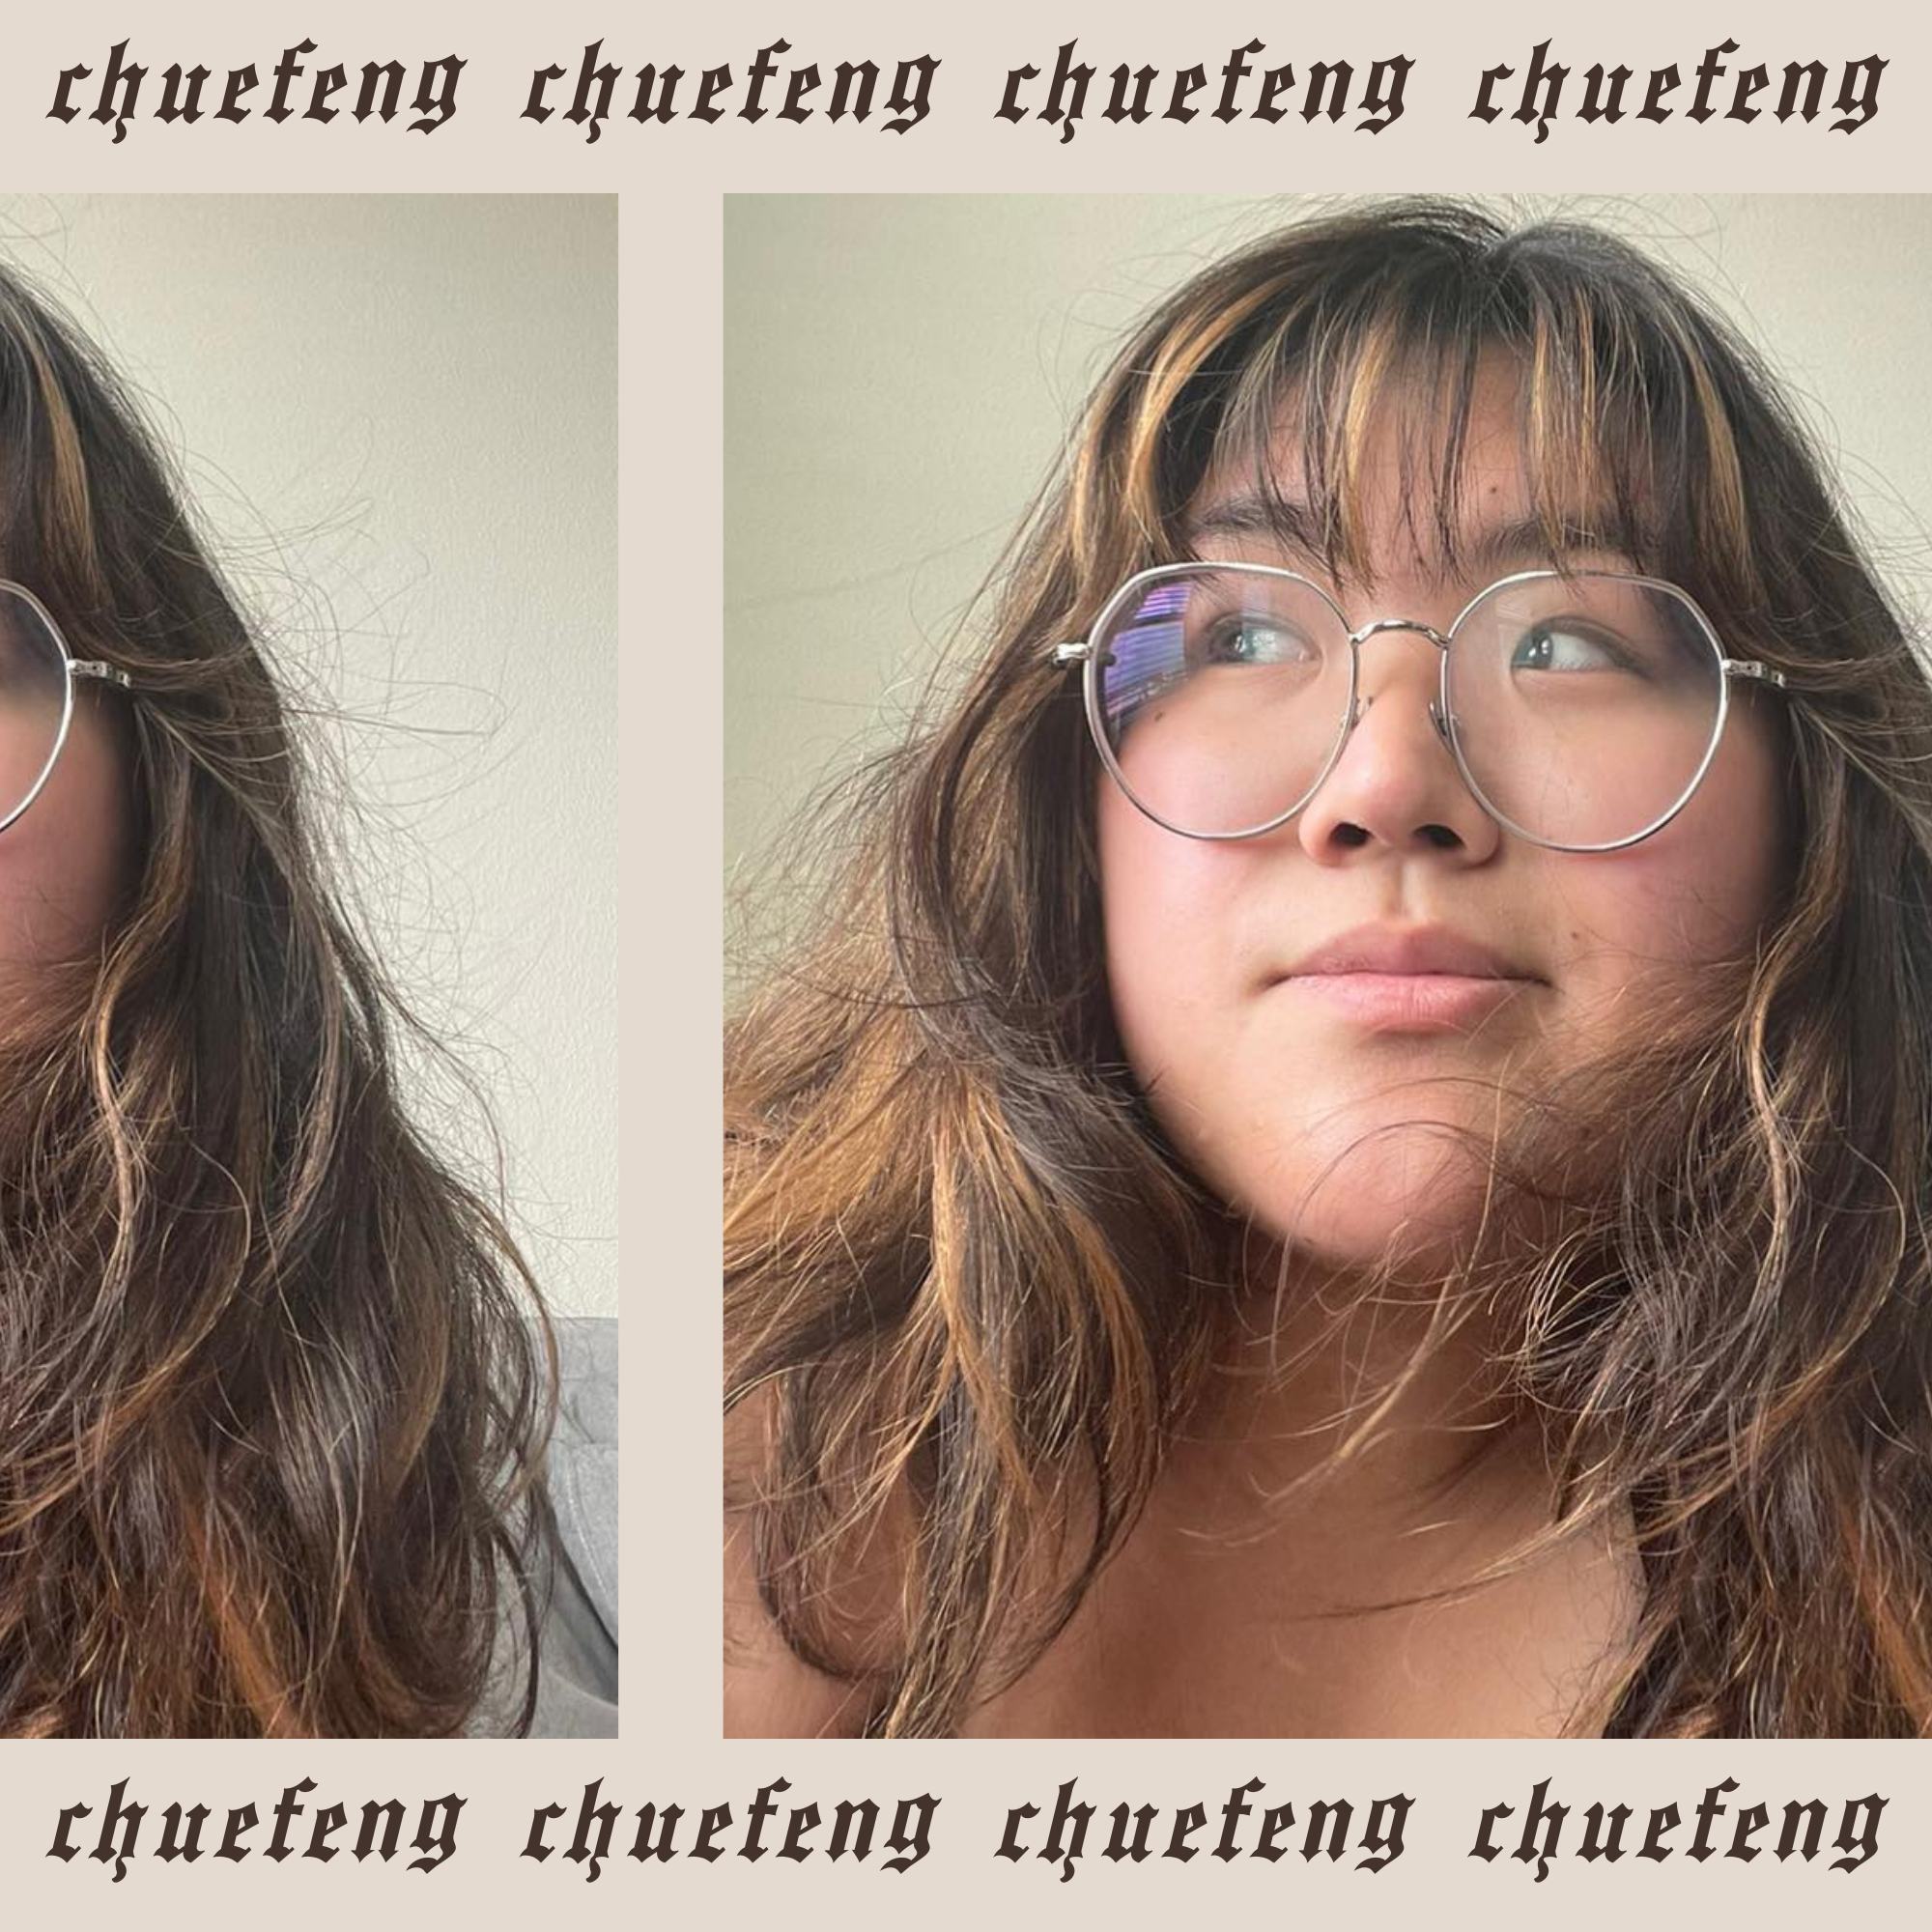 Chuefeng's queer Asian soundscape